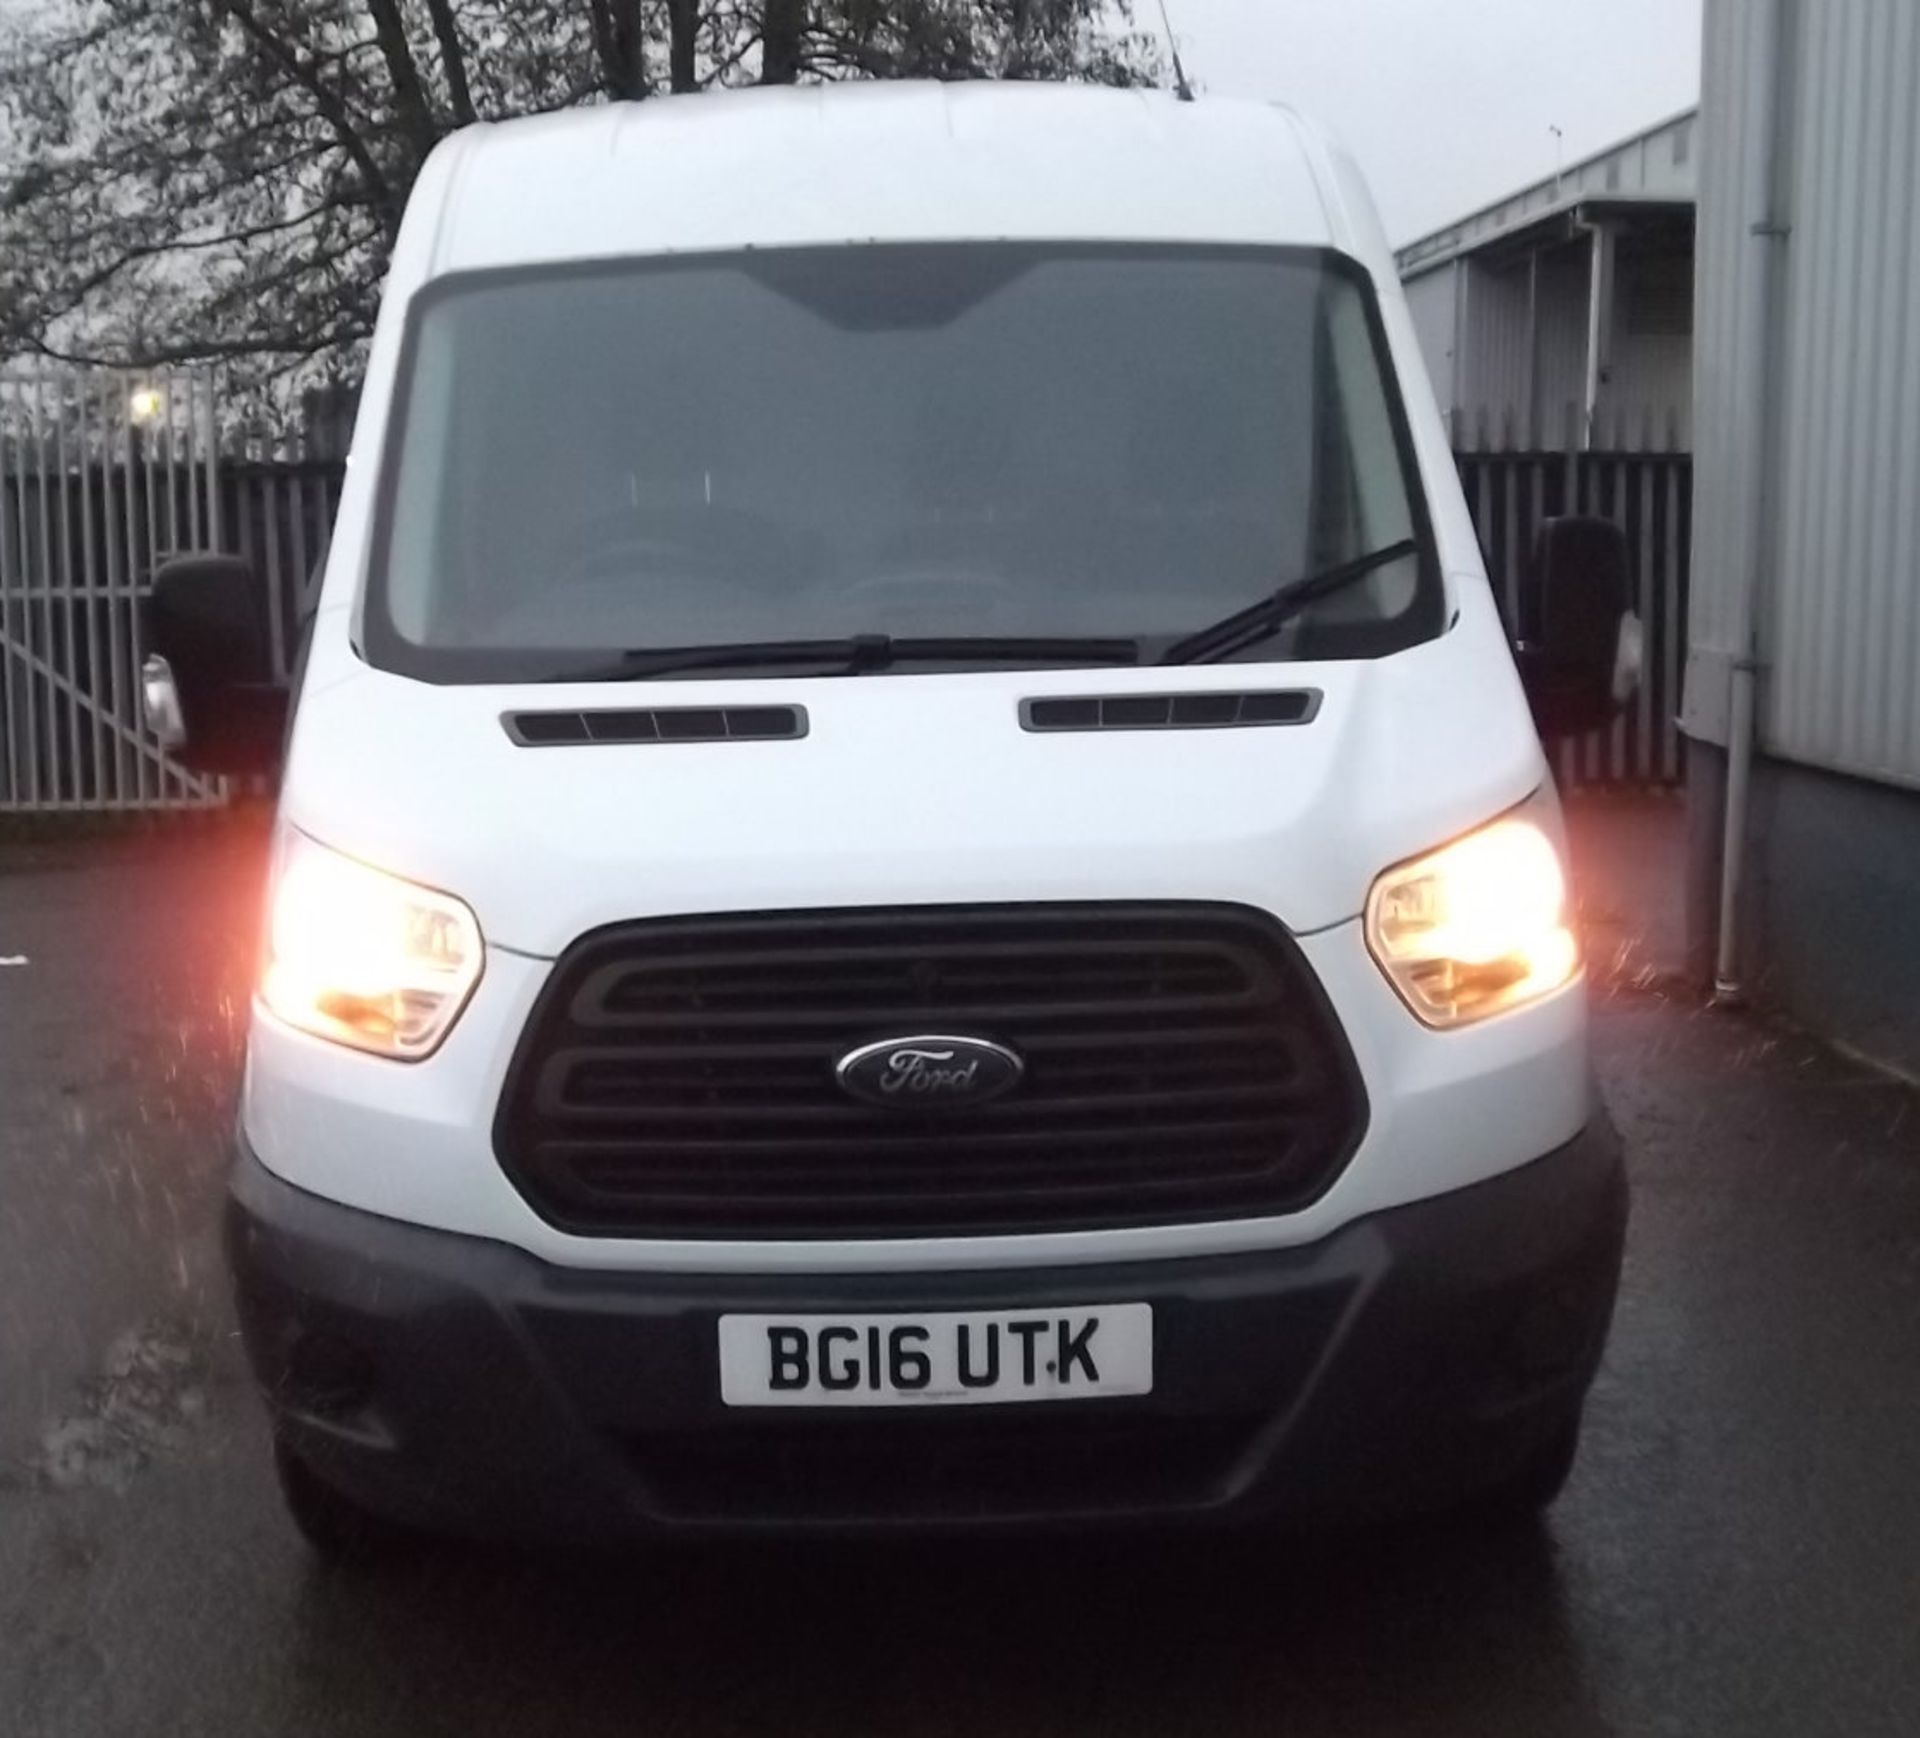 2016 Ford Transit 350 2.2 TDCi 125ps H2 Panel Van - CL505 - Location: Corby, Northamptonshire - Image 6 of 15